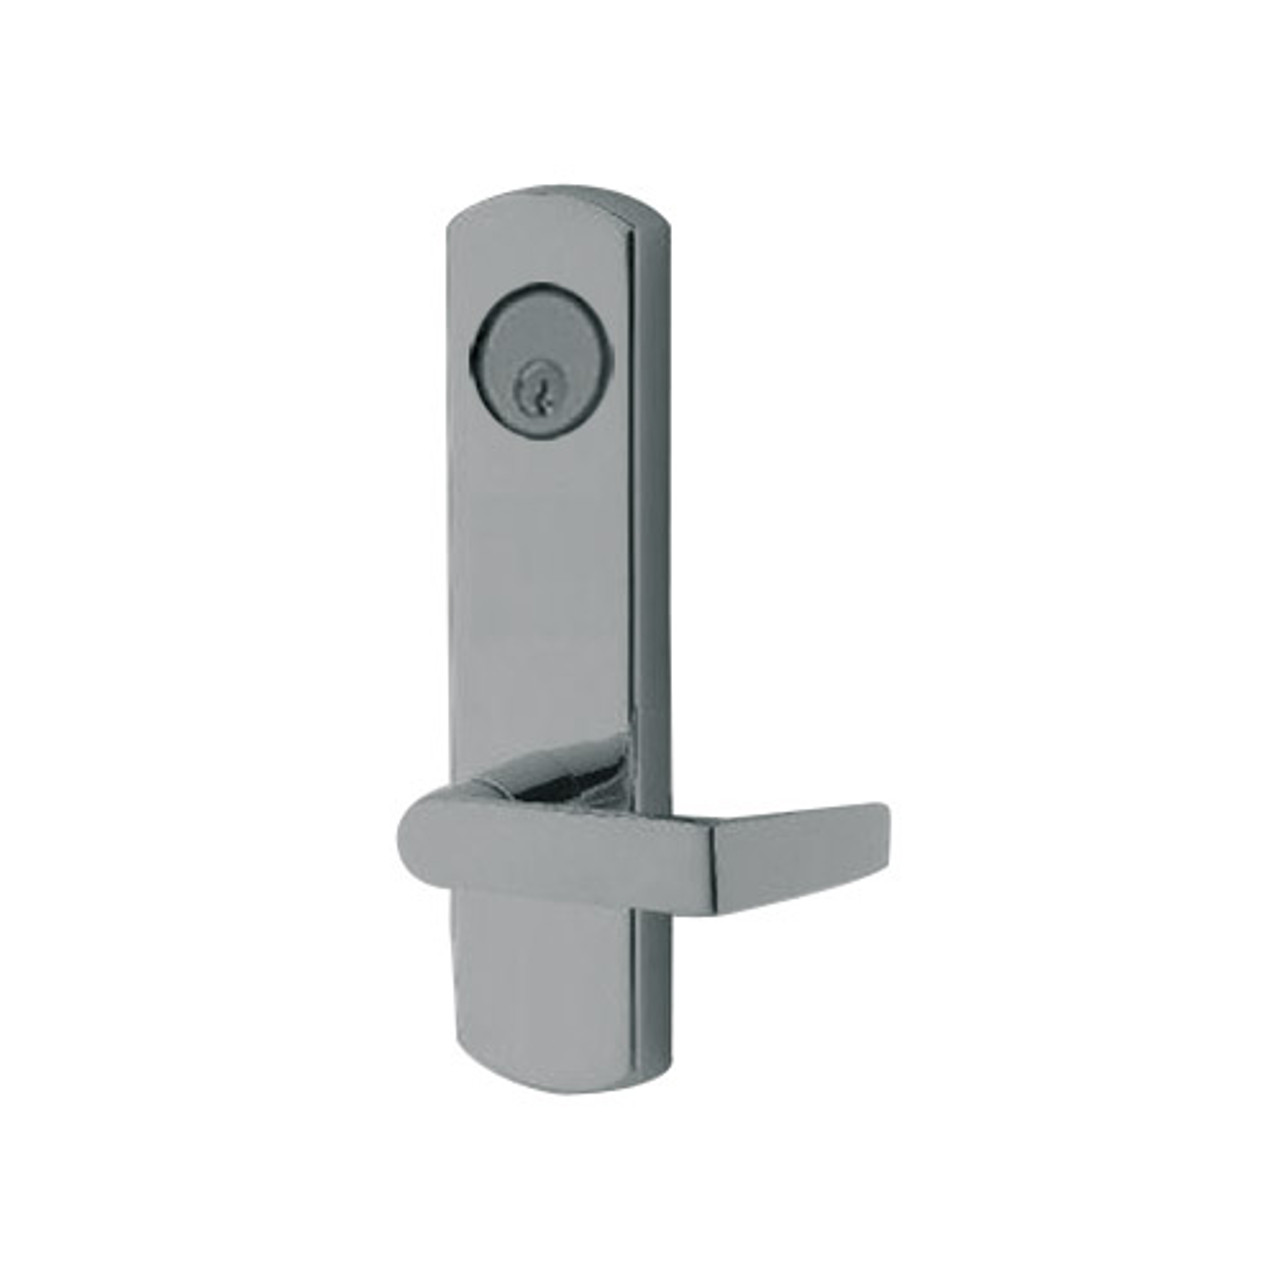 3080-03-0-94-US32D Adams Rite Standard Entry Trim with Square Lever in Satin Stainless Finish